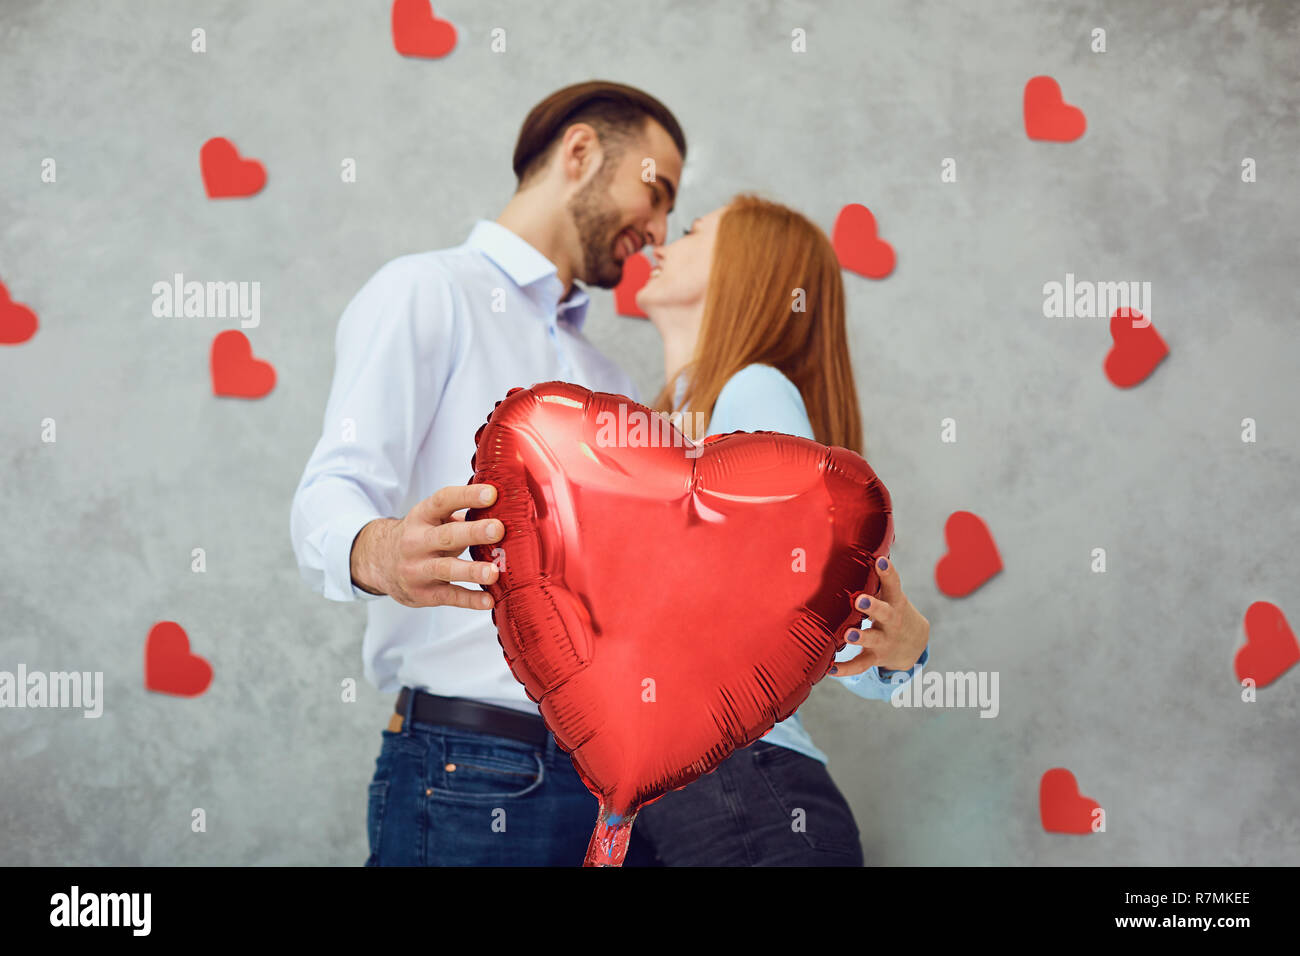 Couple with red heart balloon on a gray background.  Stock Photo